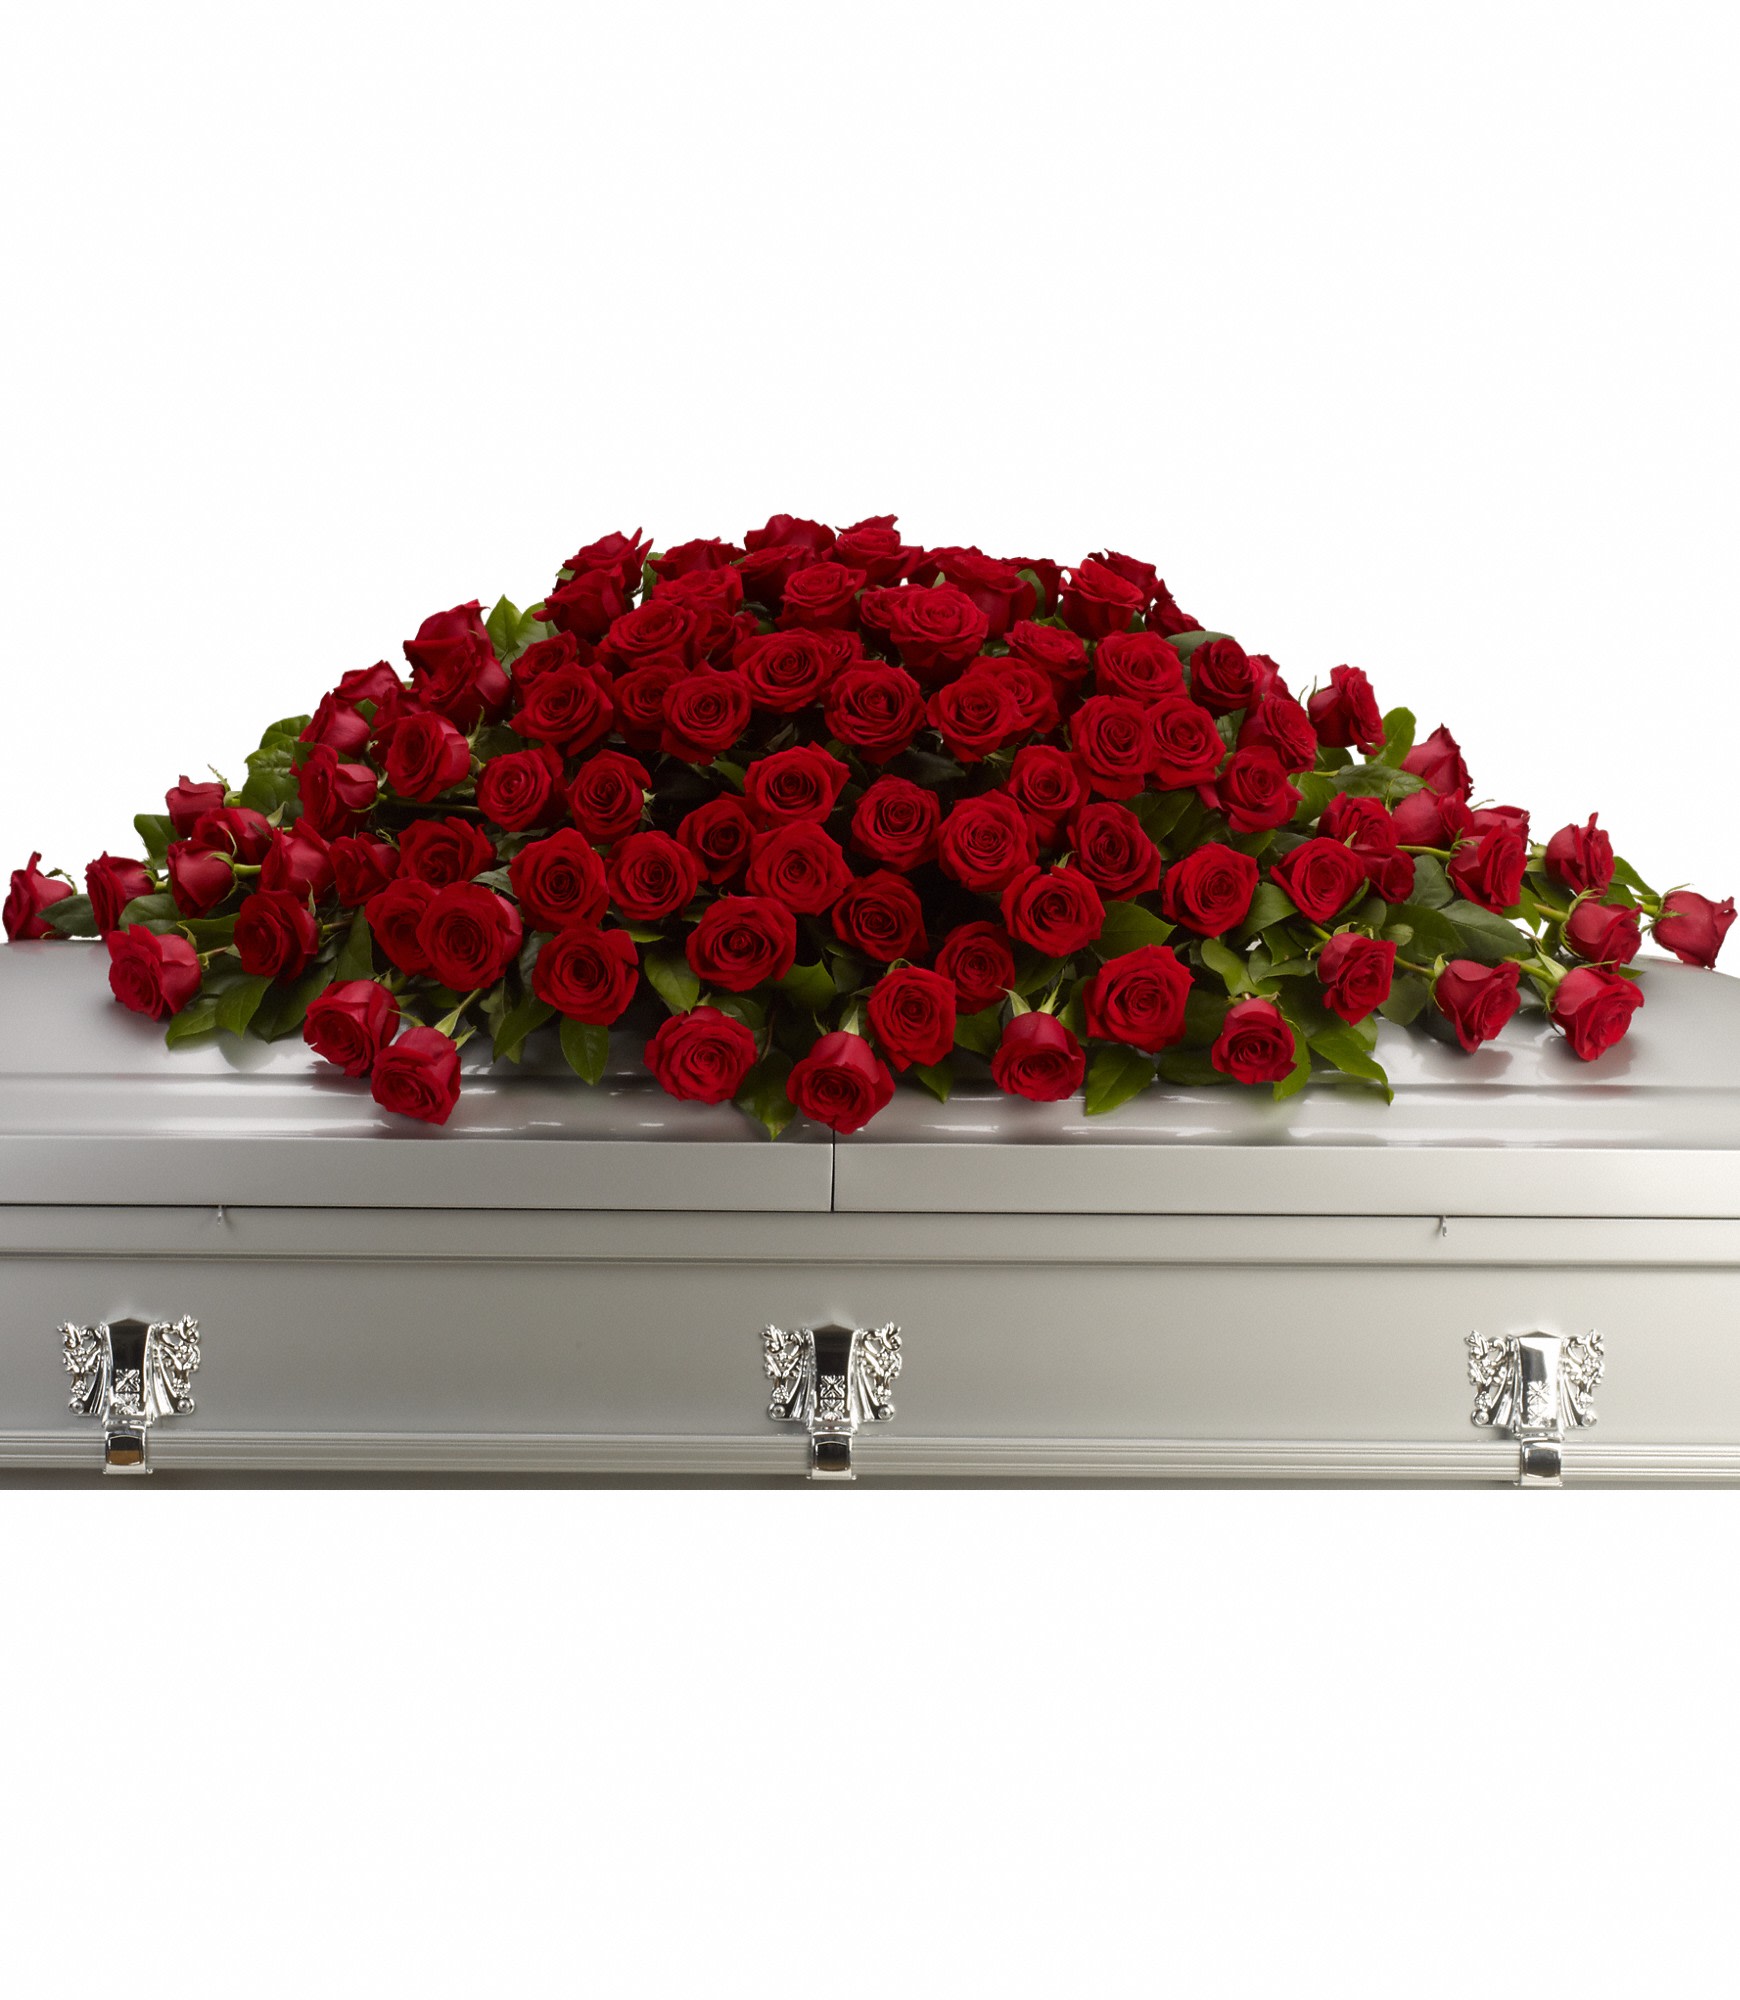 Greatest Love Casket Spray - A loving embrace of rich, regal roses in an all-red spray to adorn the casket. 